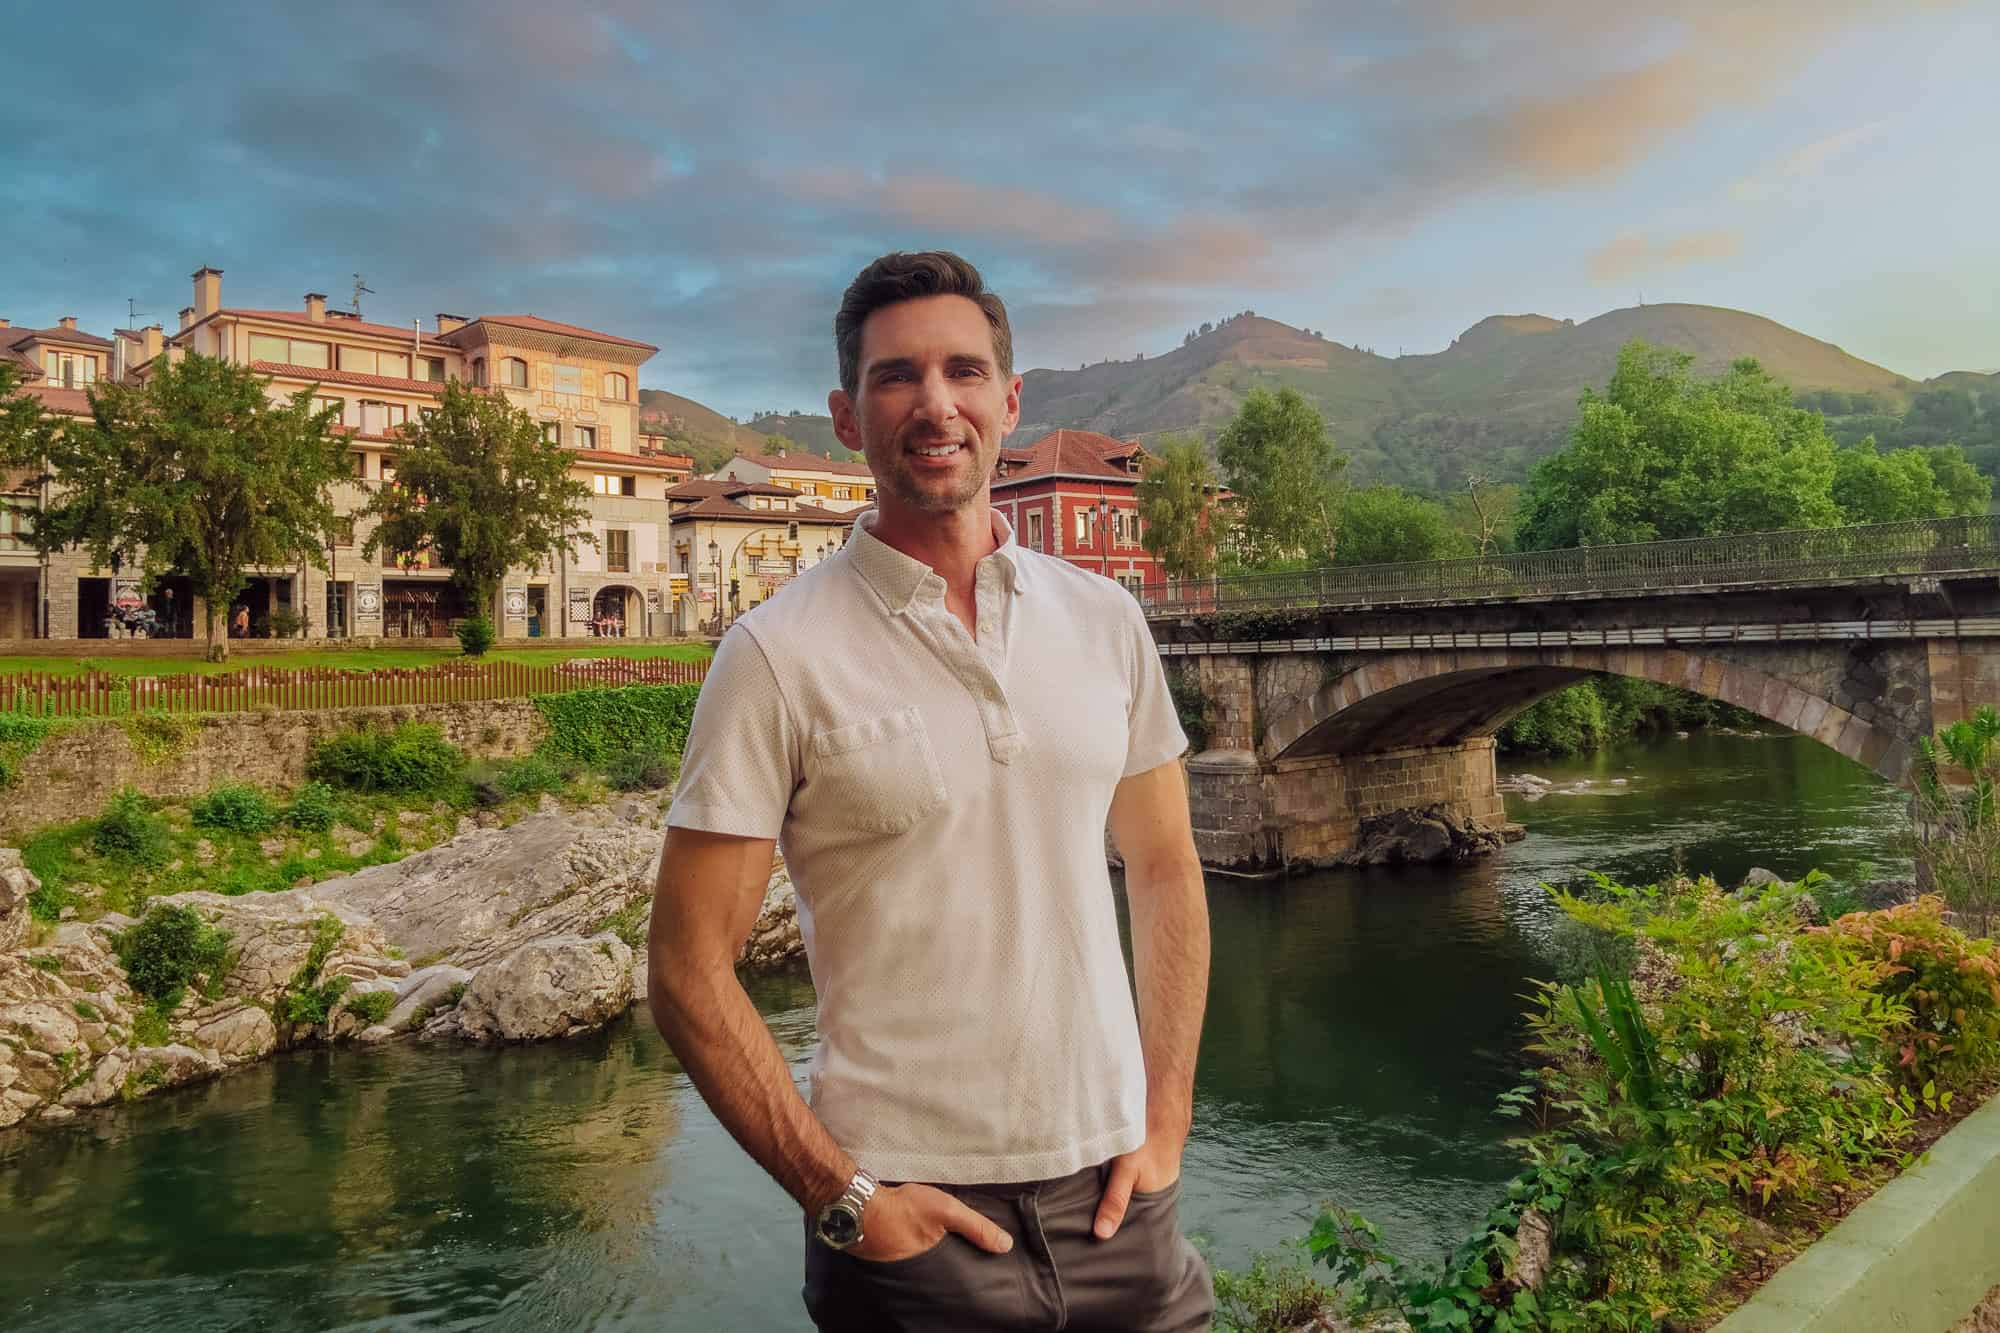 Jared Dillingham at Cangas de Onia in Spain